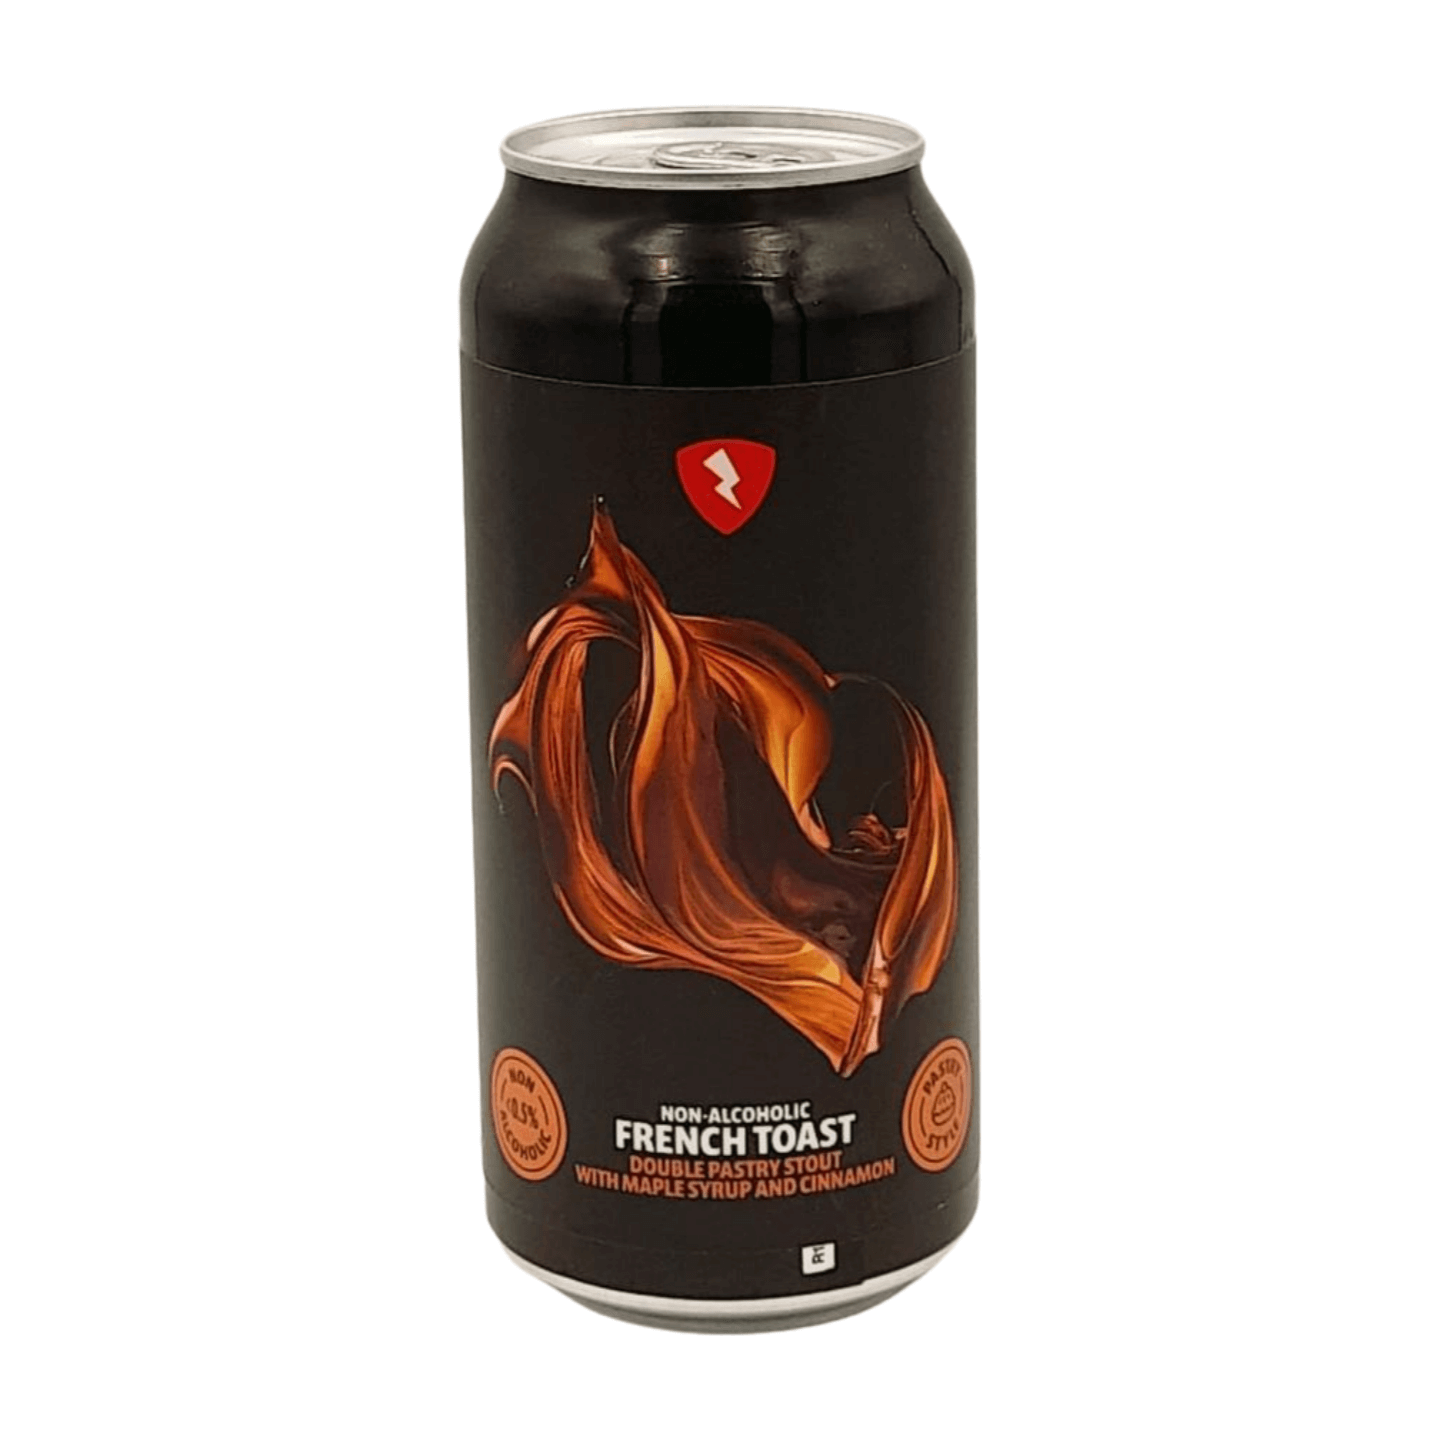 Rock City Brewing Non Alcoholic French Toast | Non Alcoholic Pastry Stout Webshop Online Verdins Bierwinkel Rotterdam